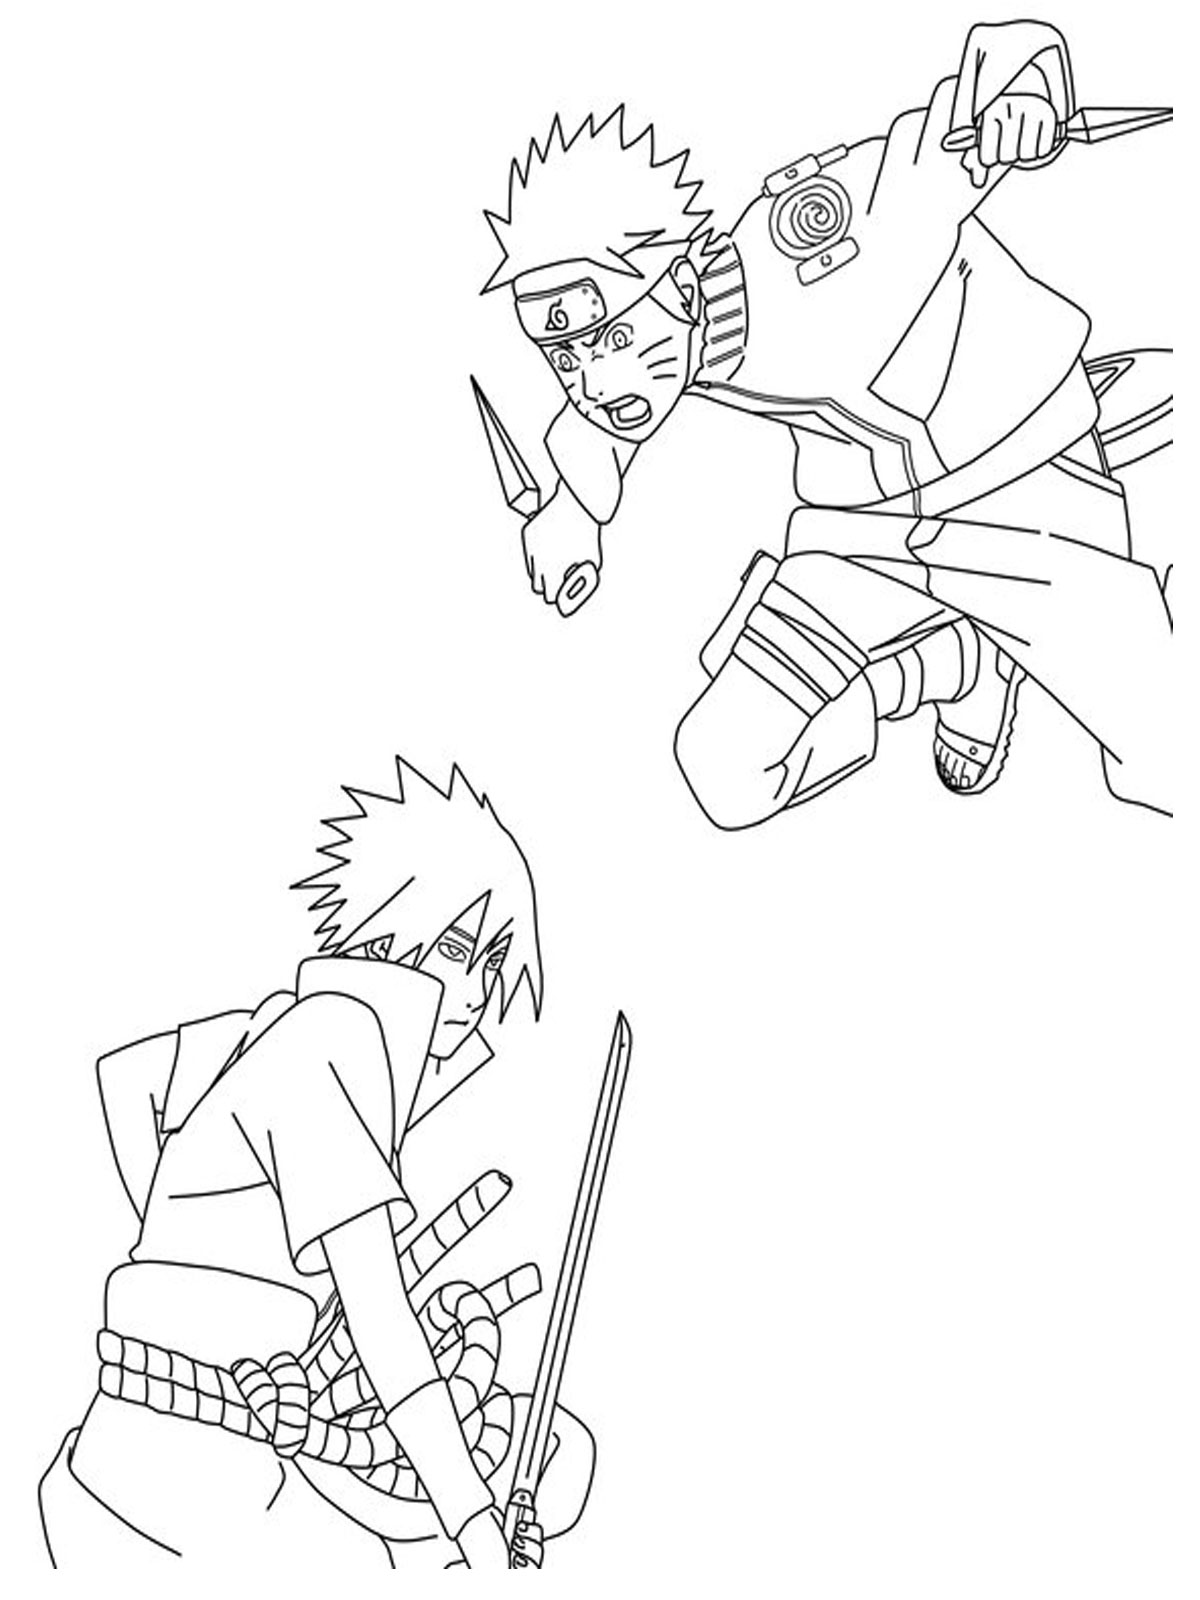 44  Coloring Pages Of Naruto  HD